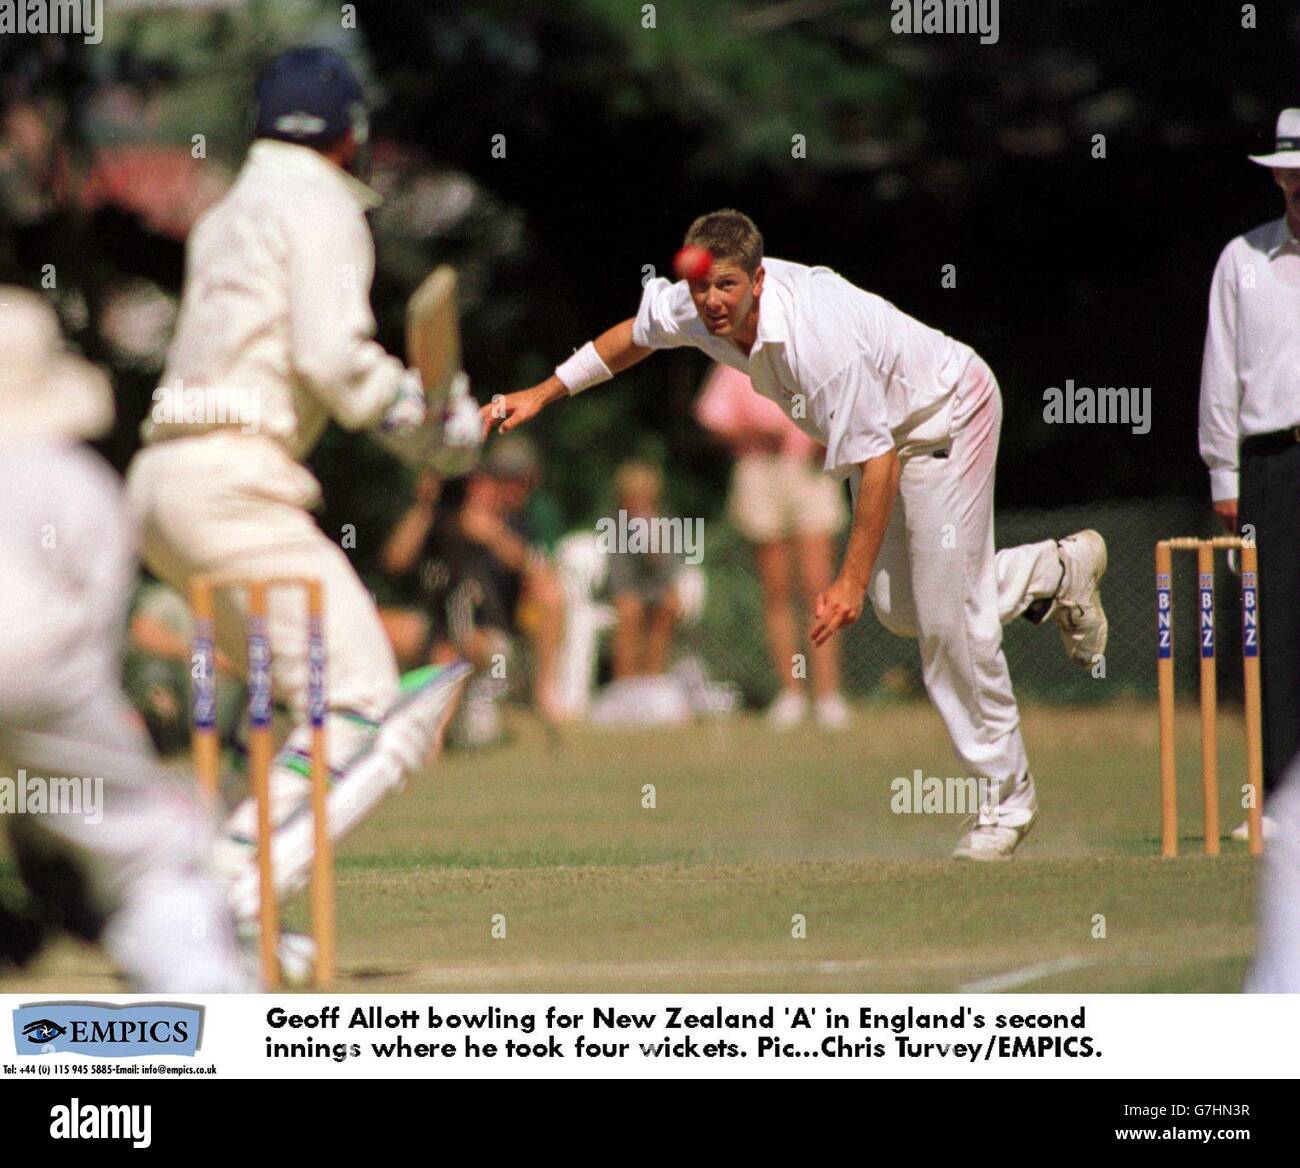 Geoff Allott bowling for New Zealand 'A' in England's second innings where he took four wickets. Stock Photo